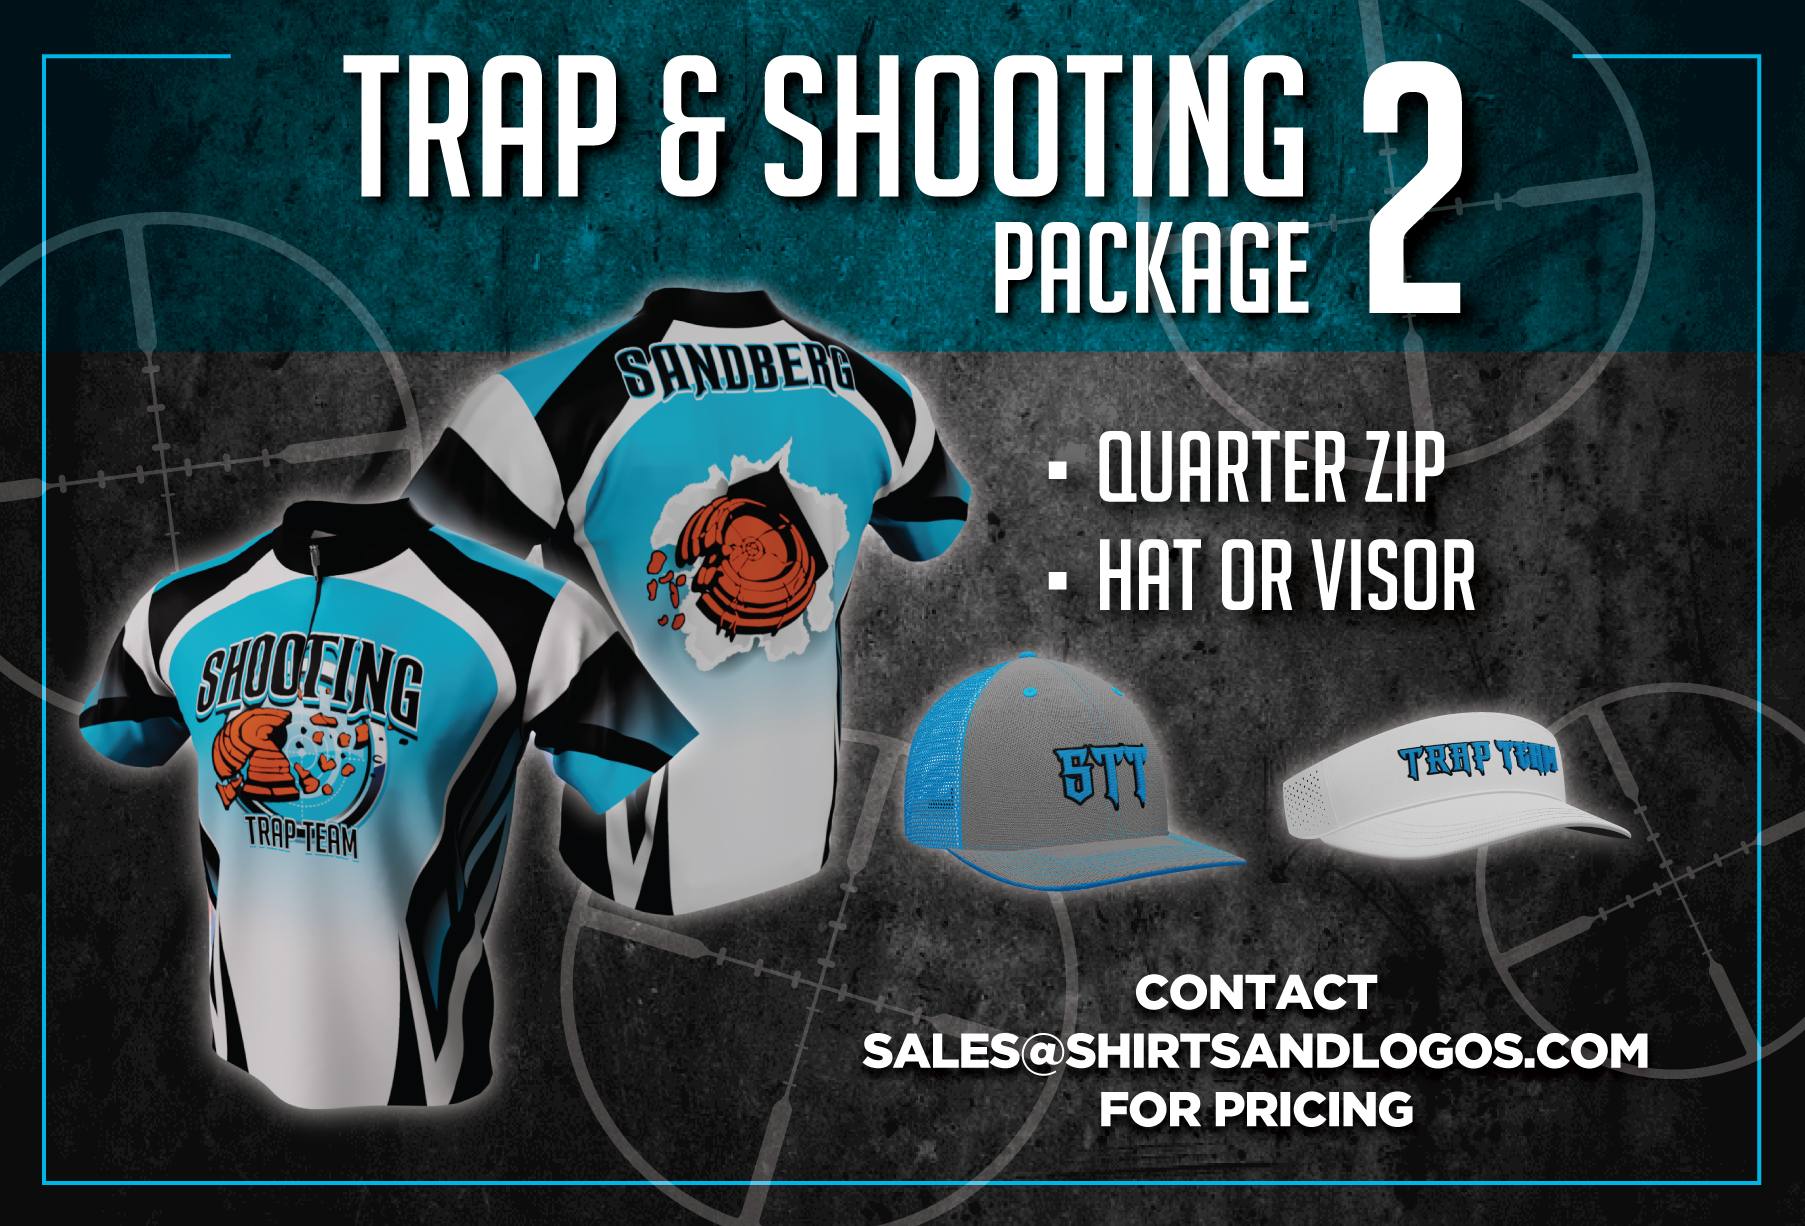 Trap and shooting Package 2